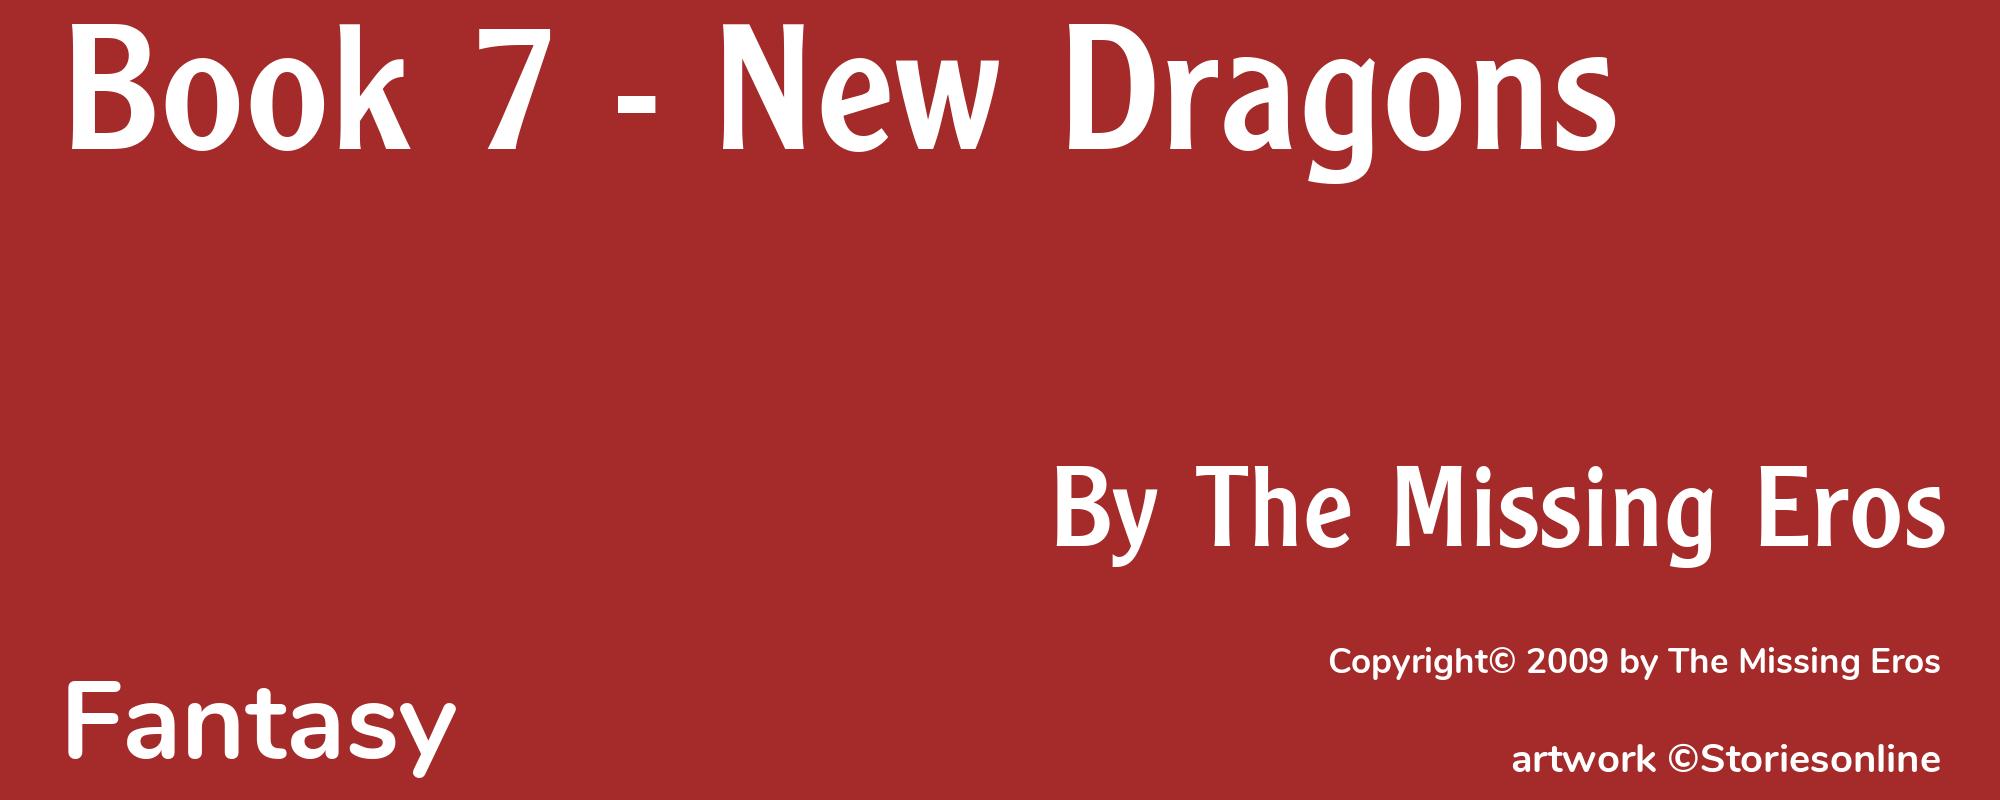 Book 7 - New Dragons - Cover